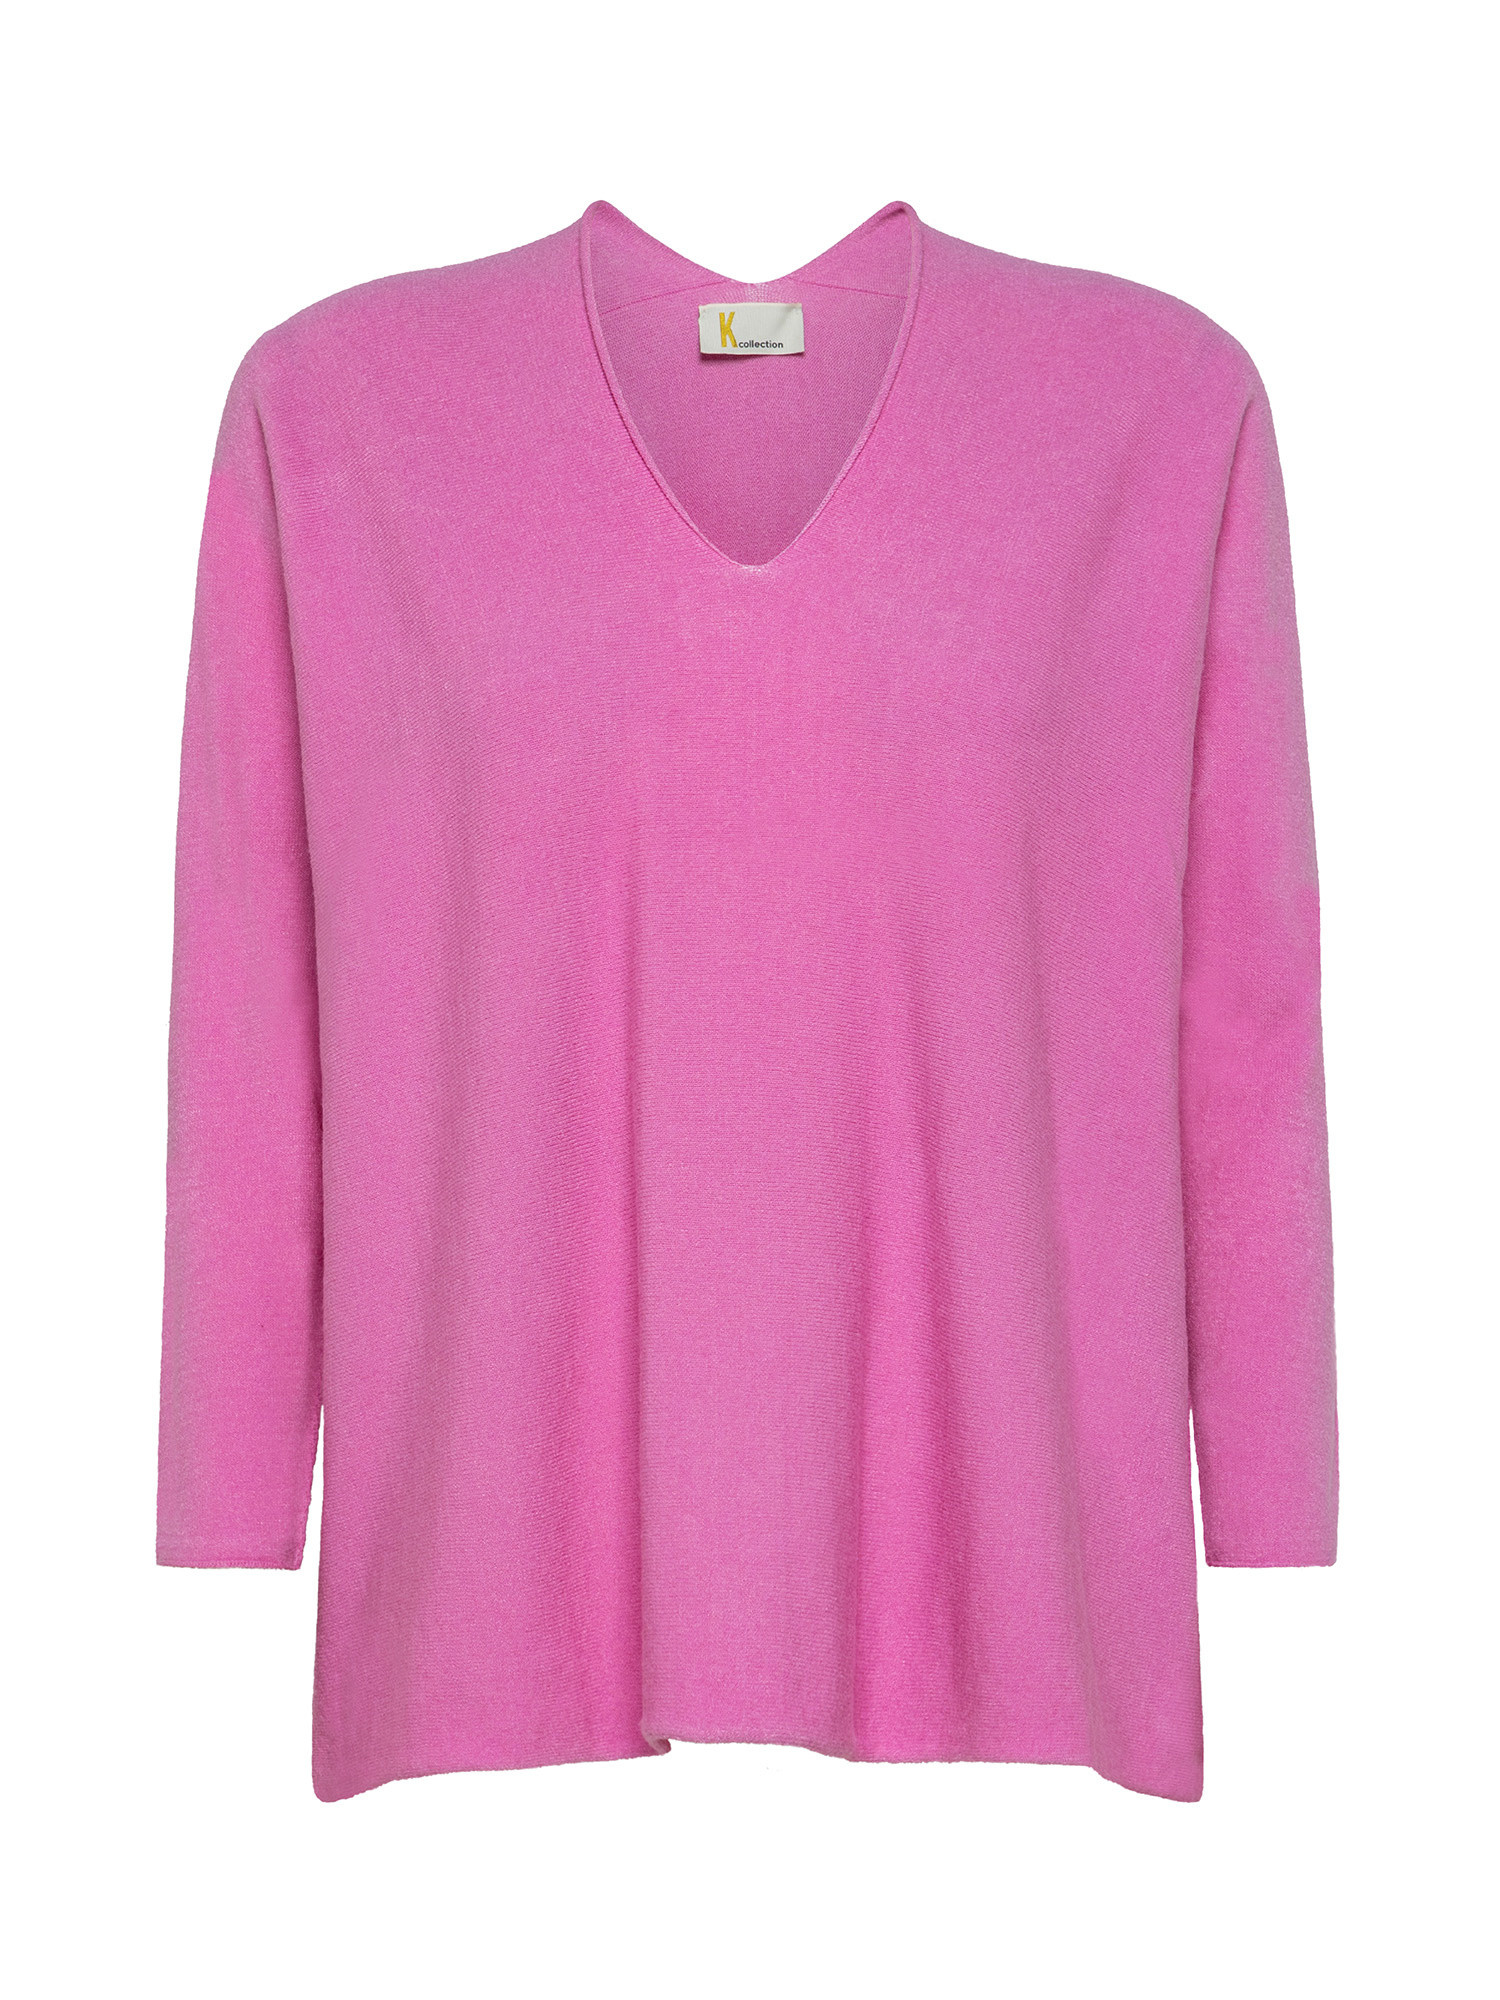 K Collection - Pullover, Pink Fuchsia, large image number 0